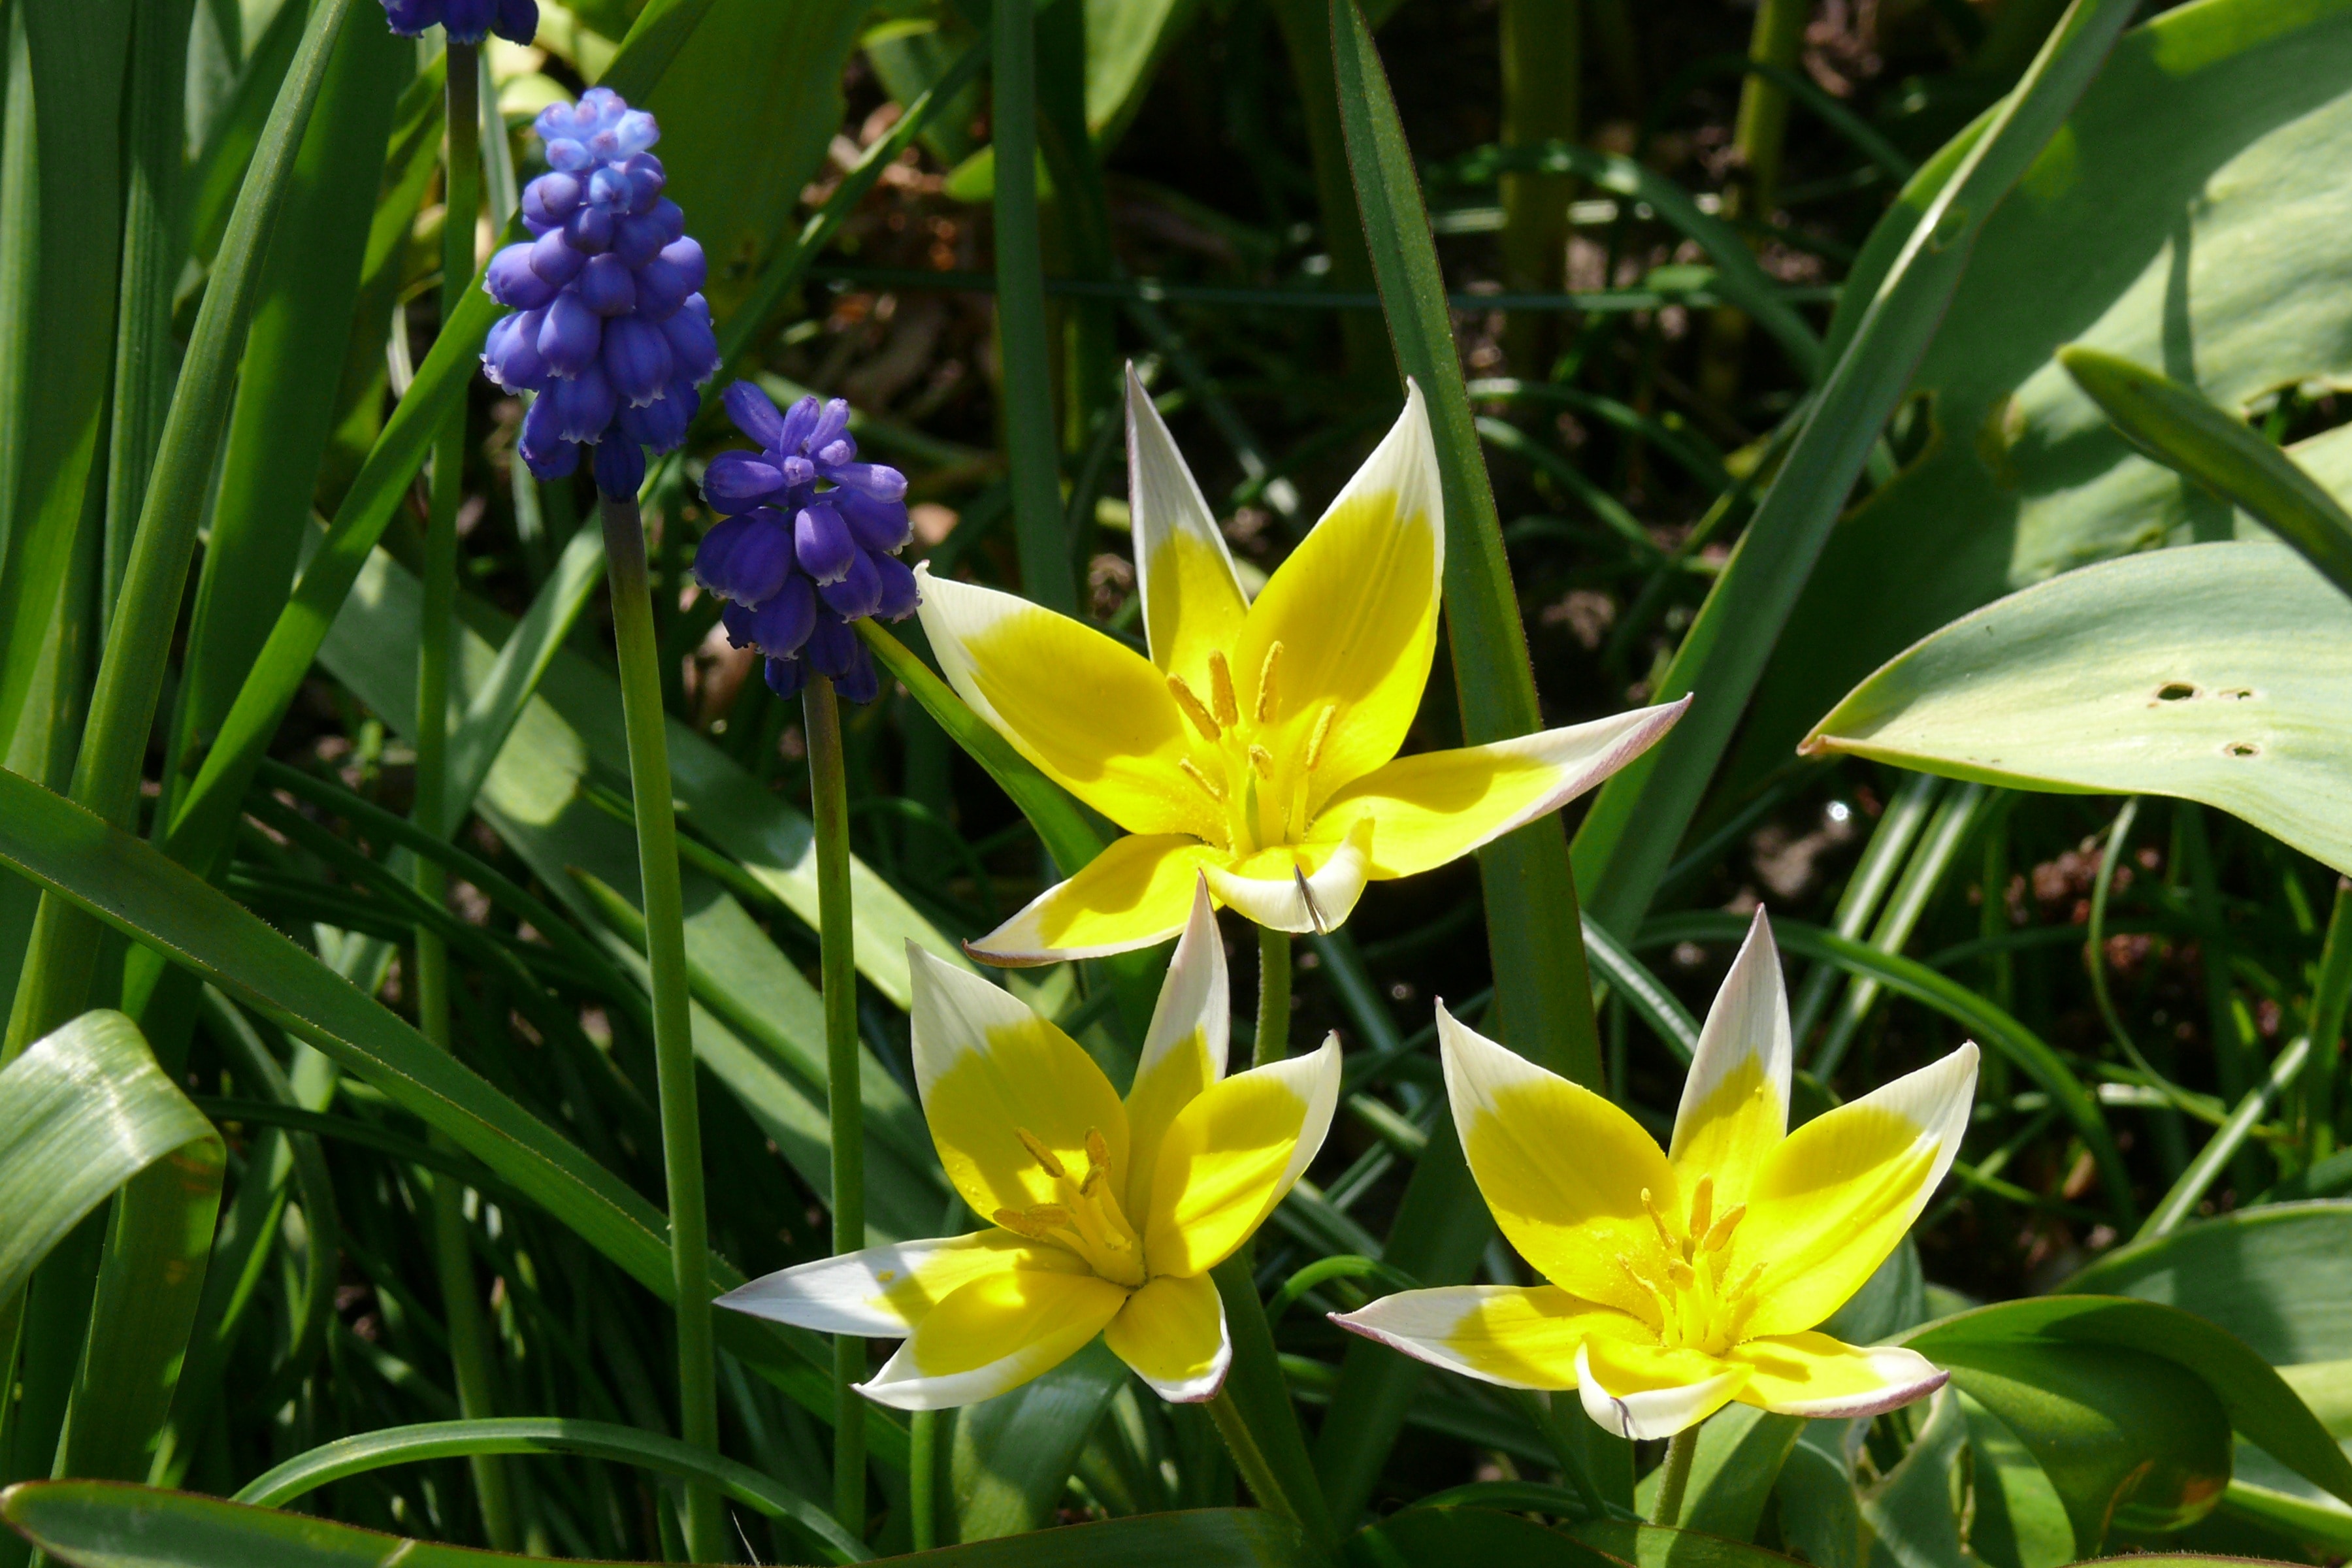 yellow and white lilies and purpel grape hyacinth